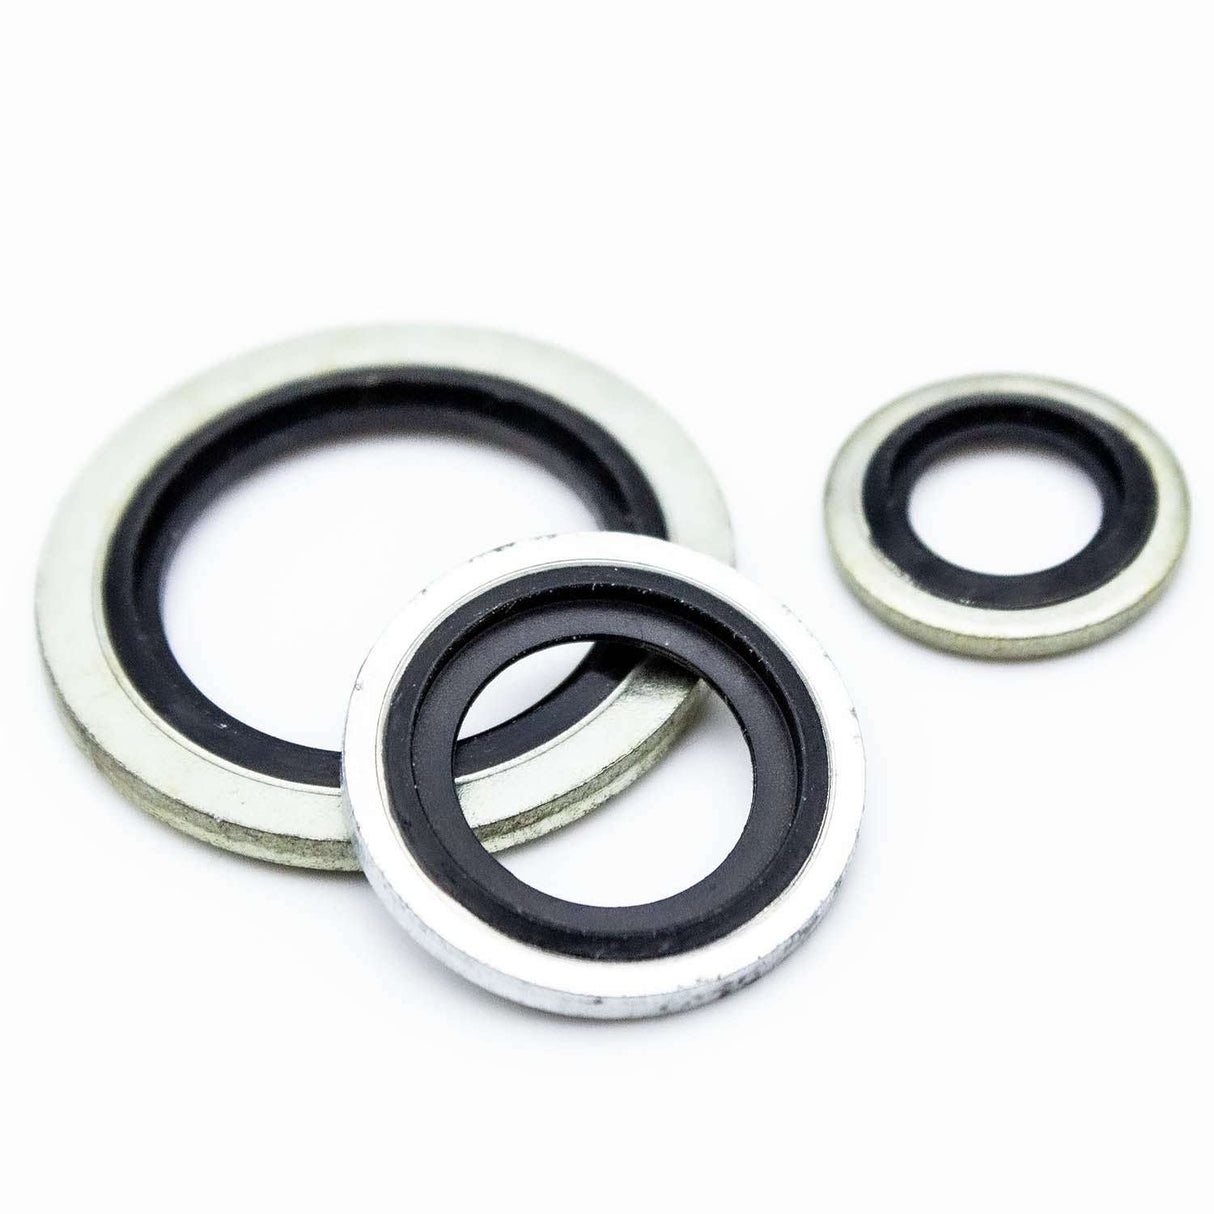 DRSN series - steel sealing ring with nitrile (NBR) insert